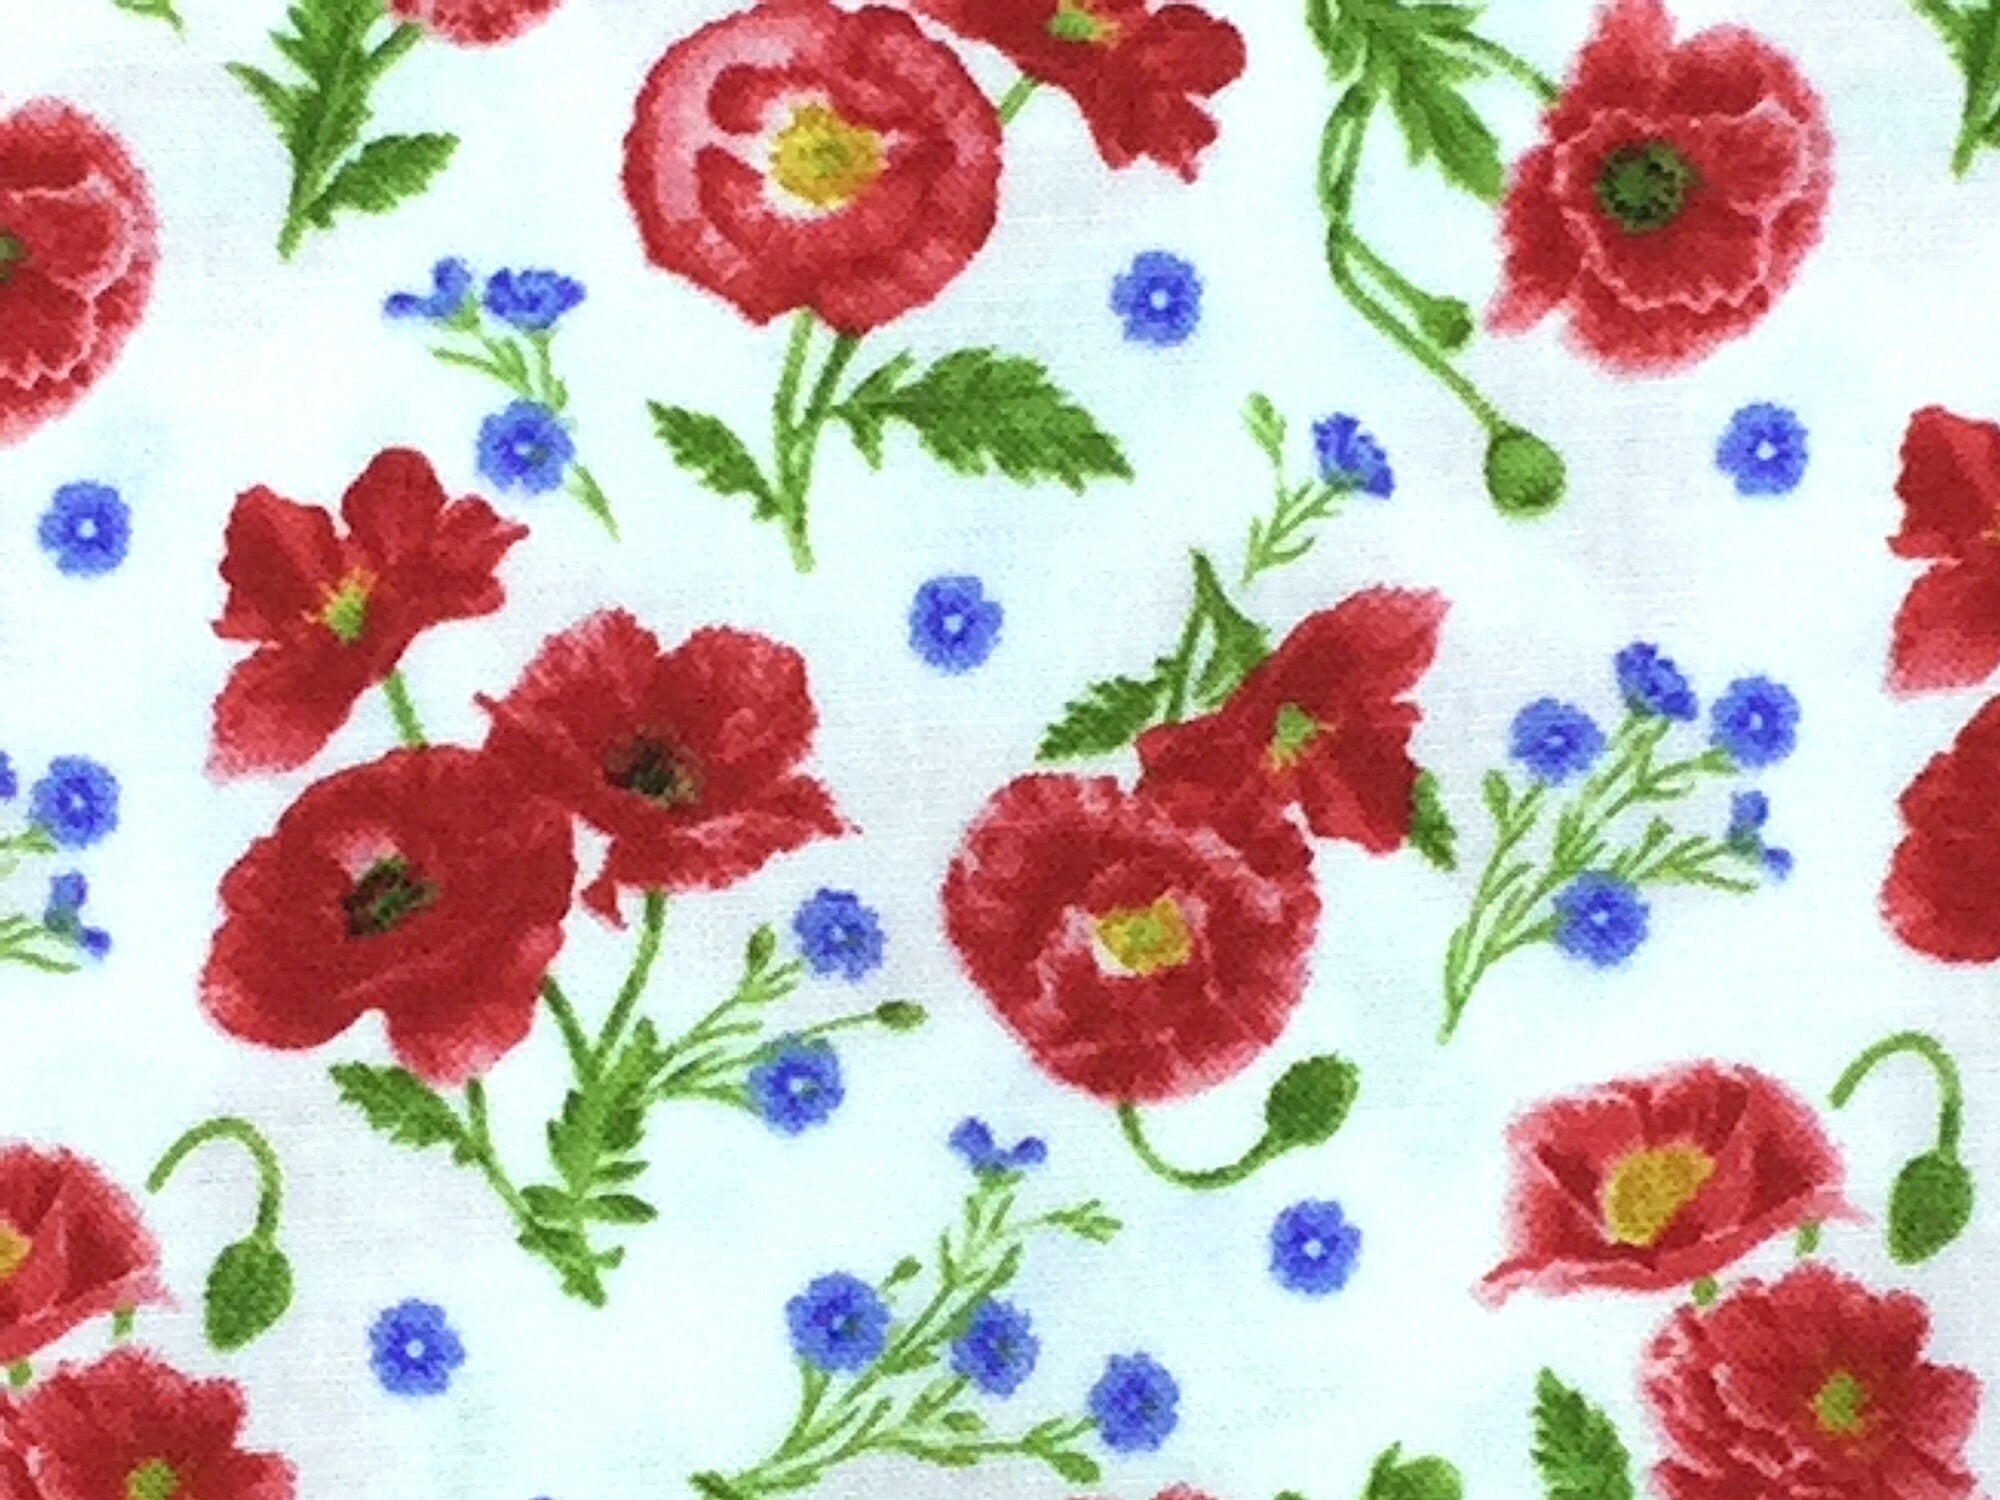 This fabric has red poppies on a white background